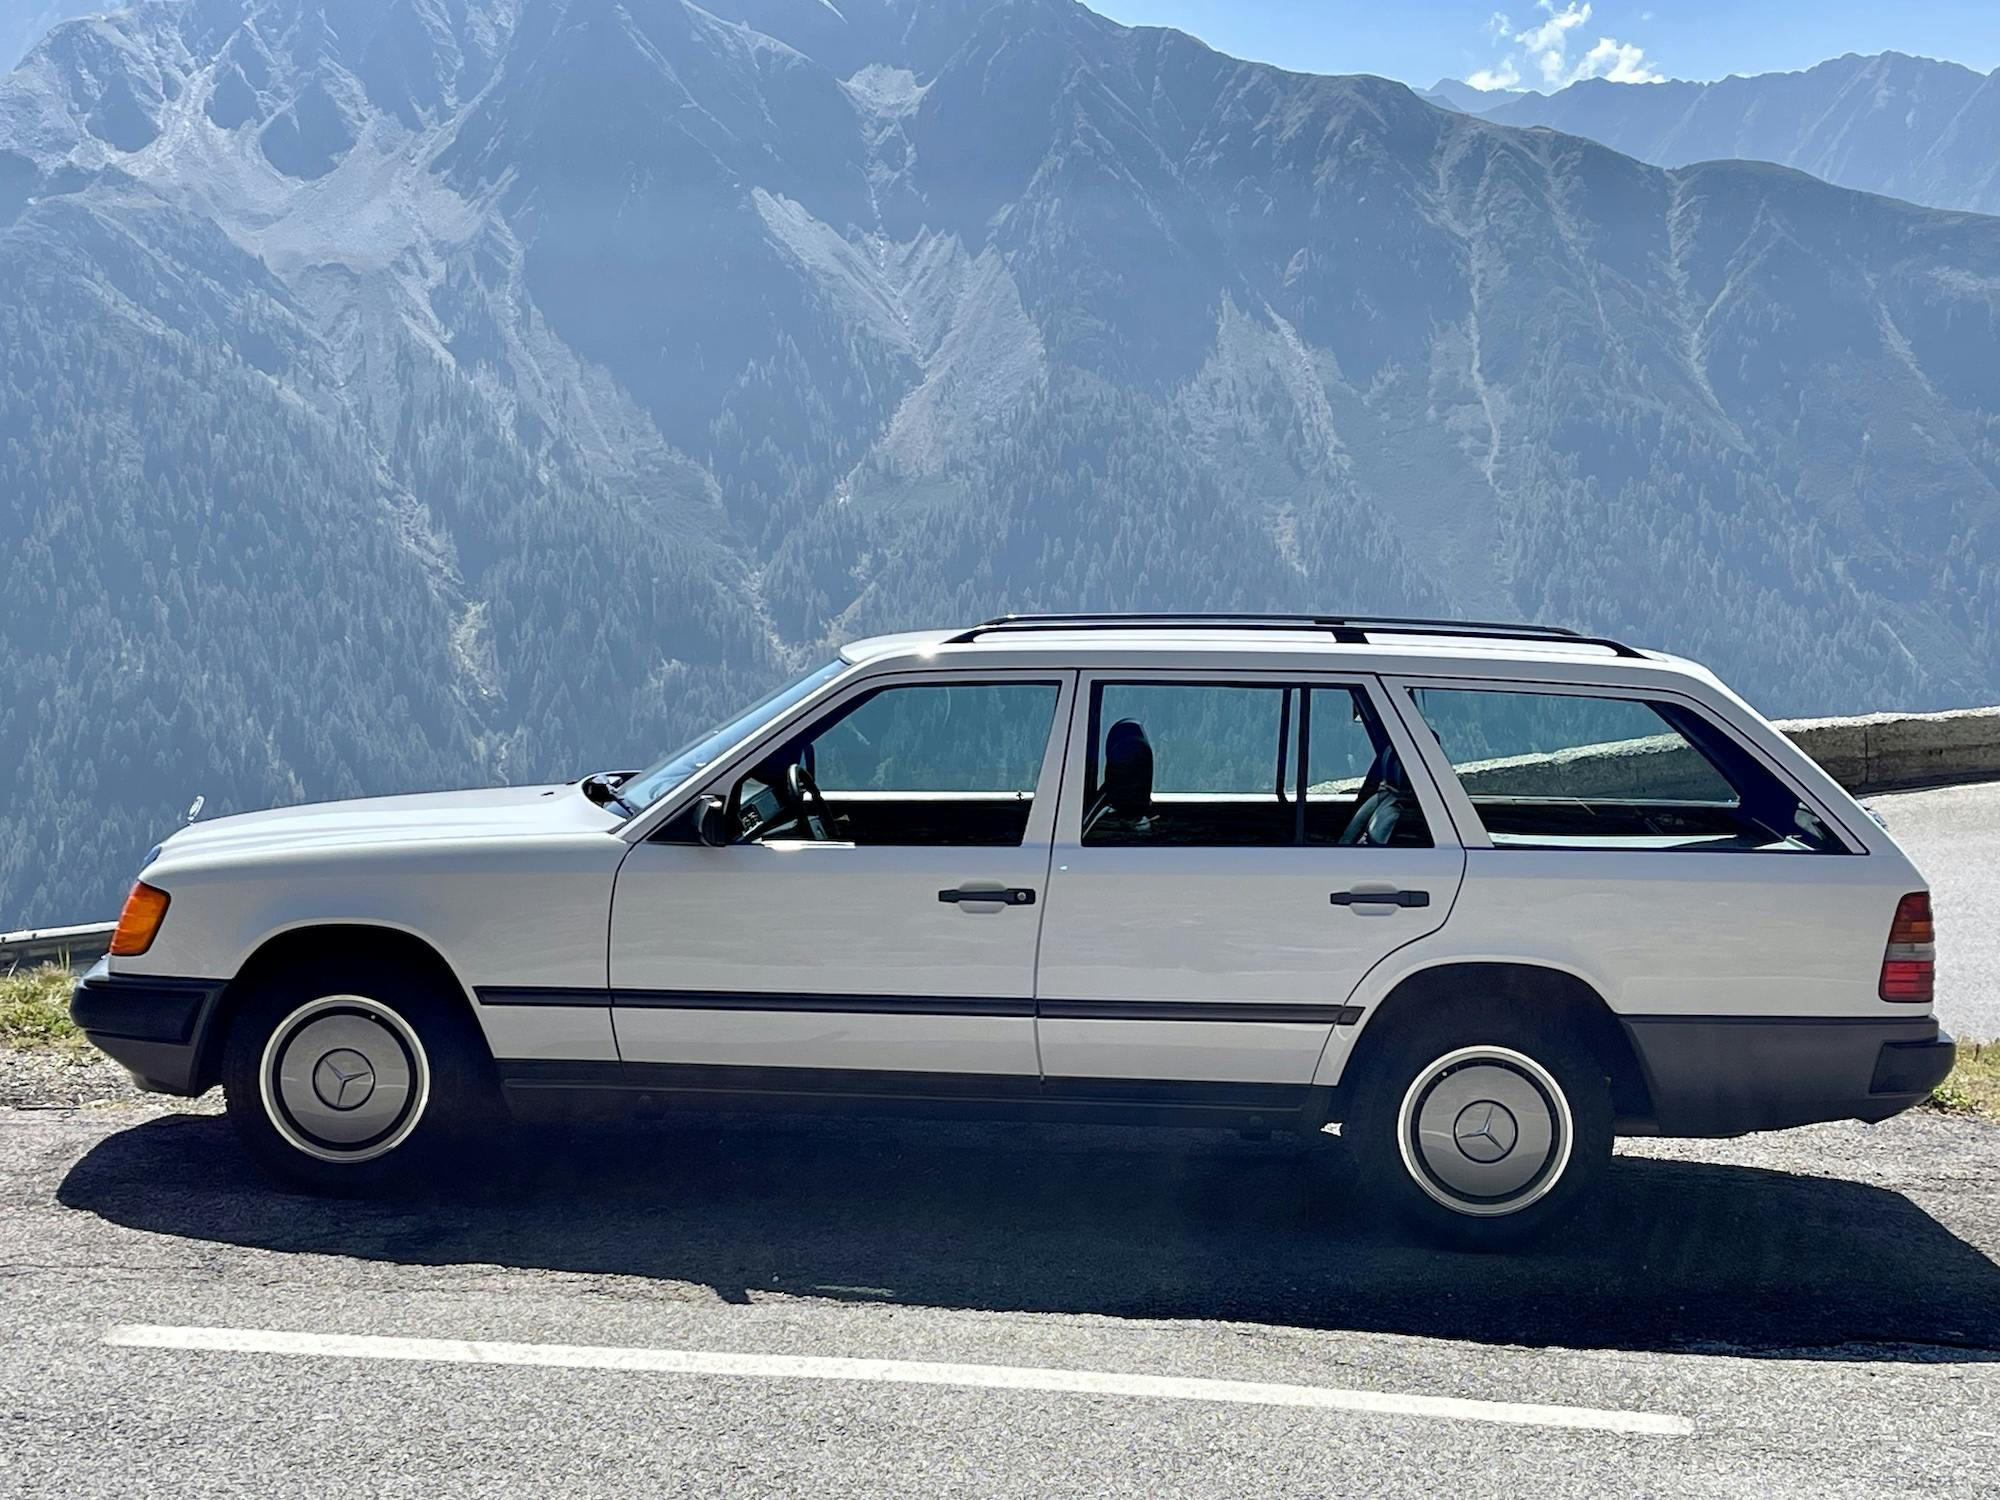 Mercedes-Benz W124: The Engineer's E-Class takes on the Alps - Hagerty  Media